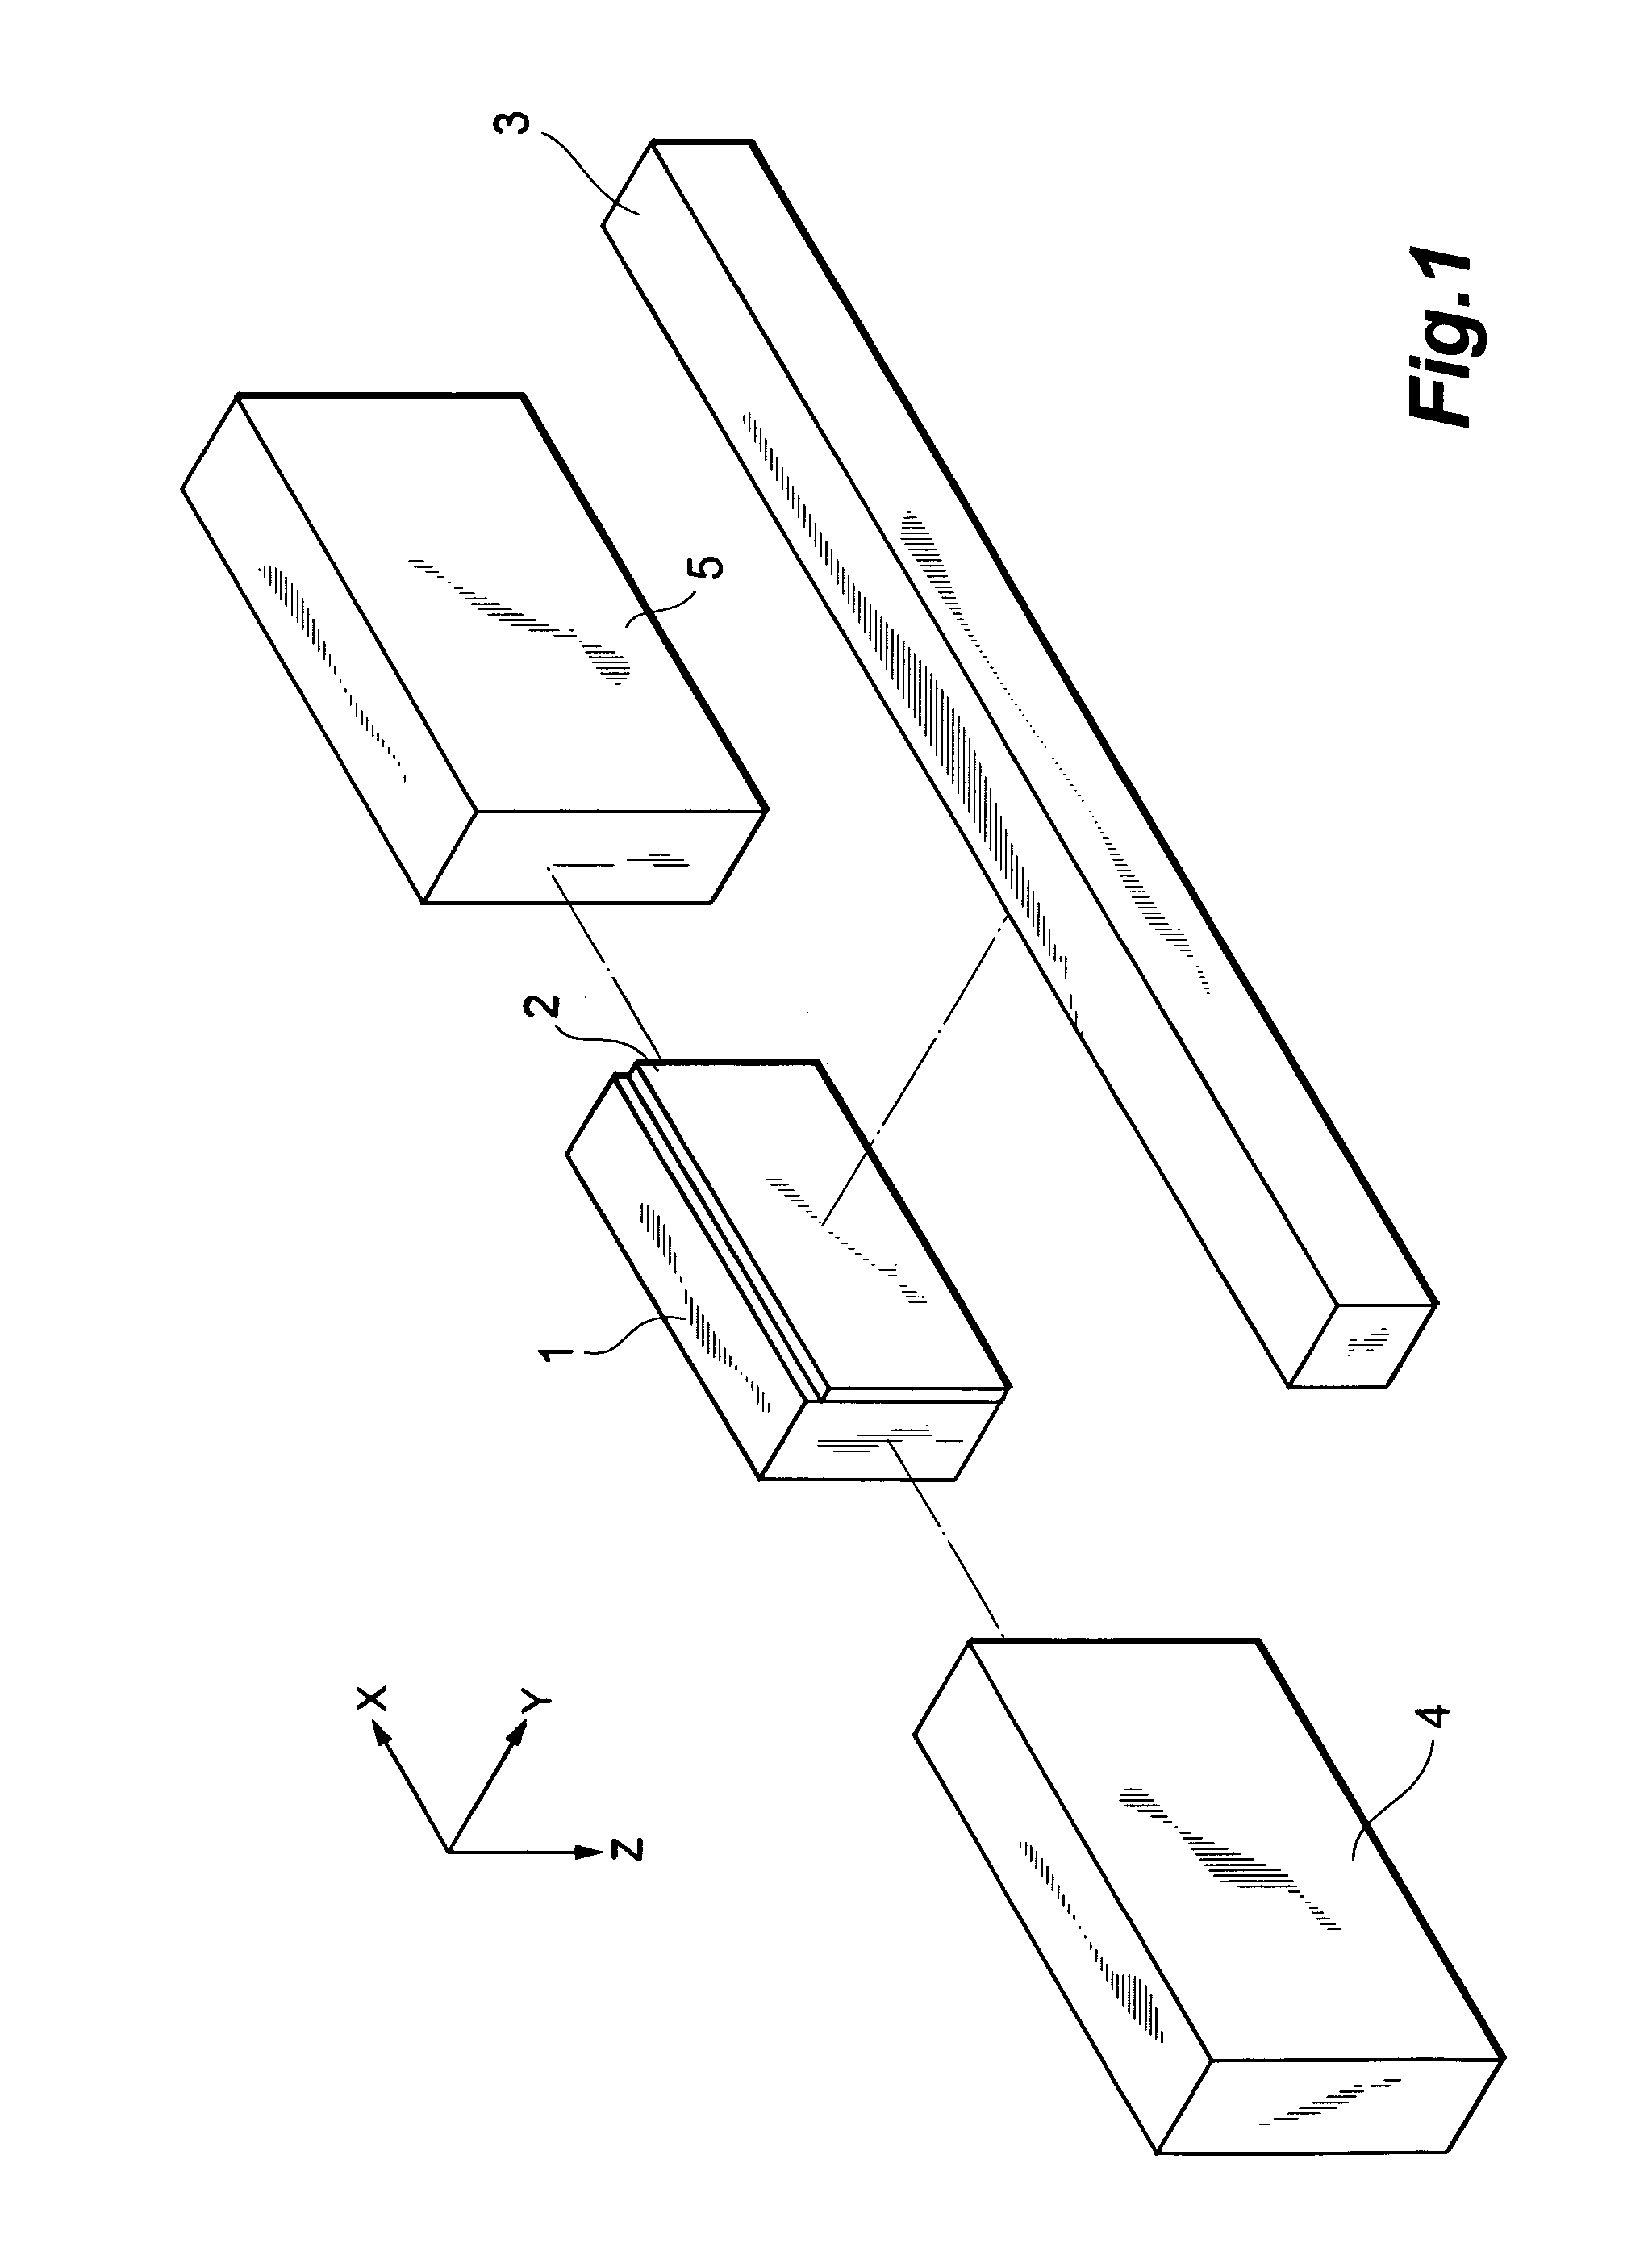 Magnetic tape head with magnetic head layer formed on base substrate